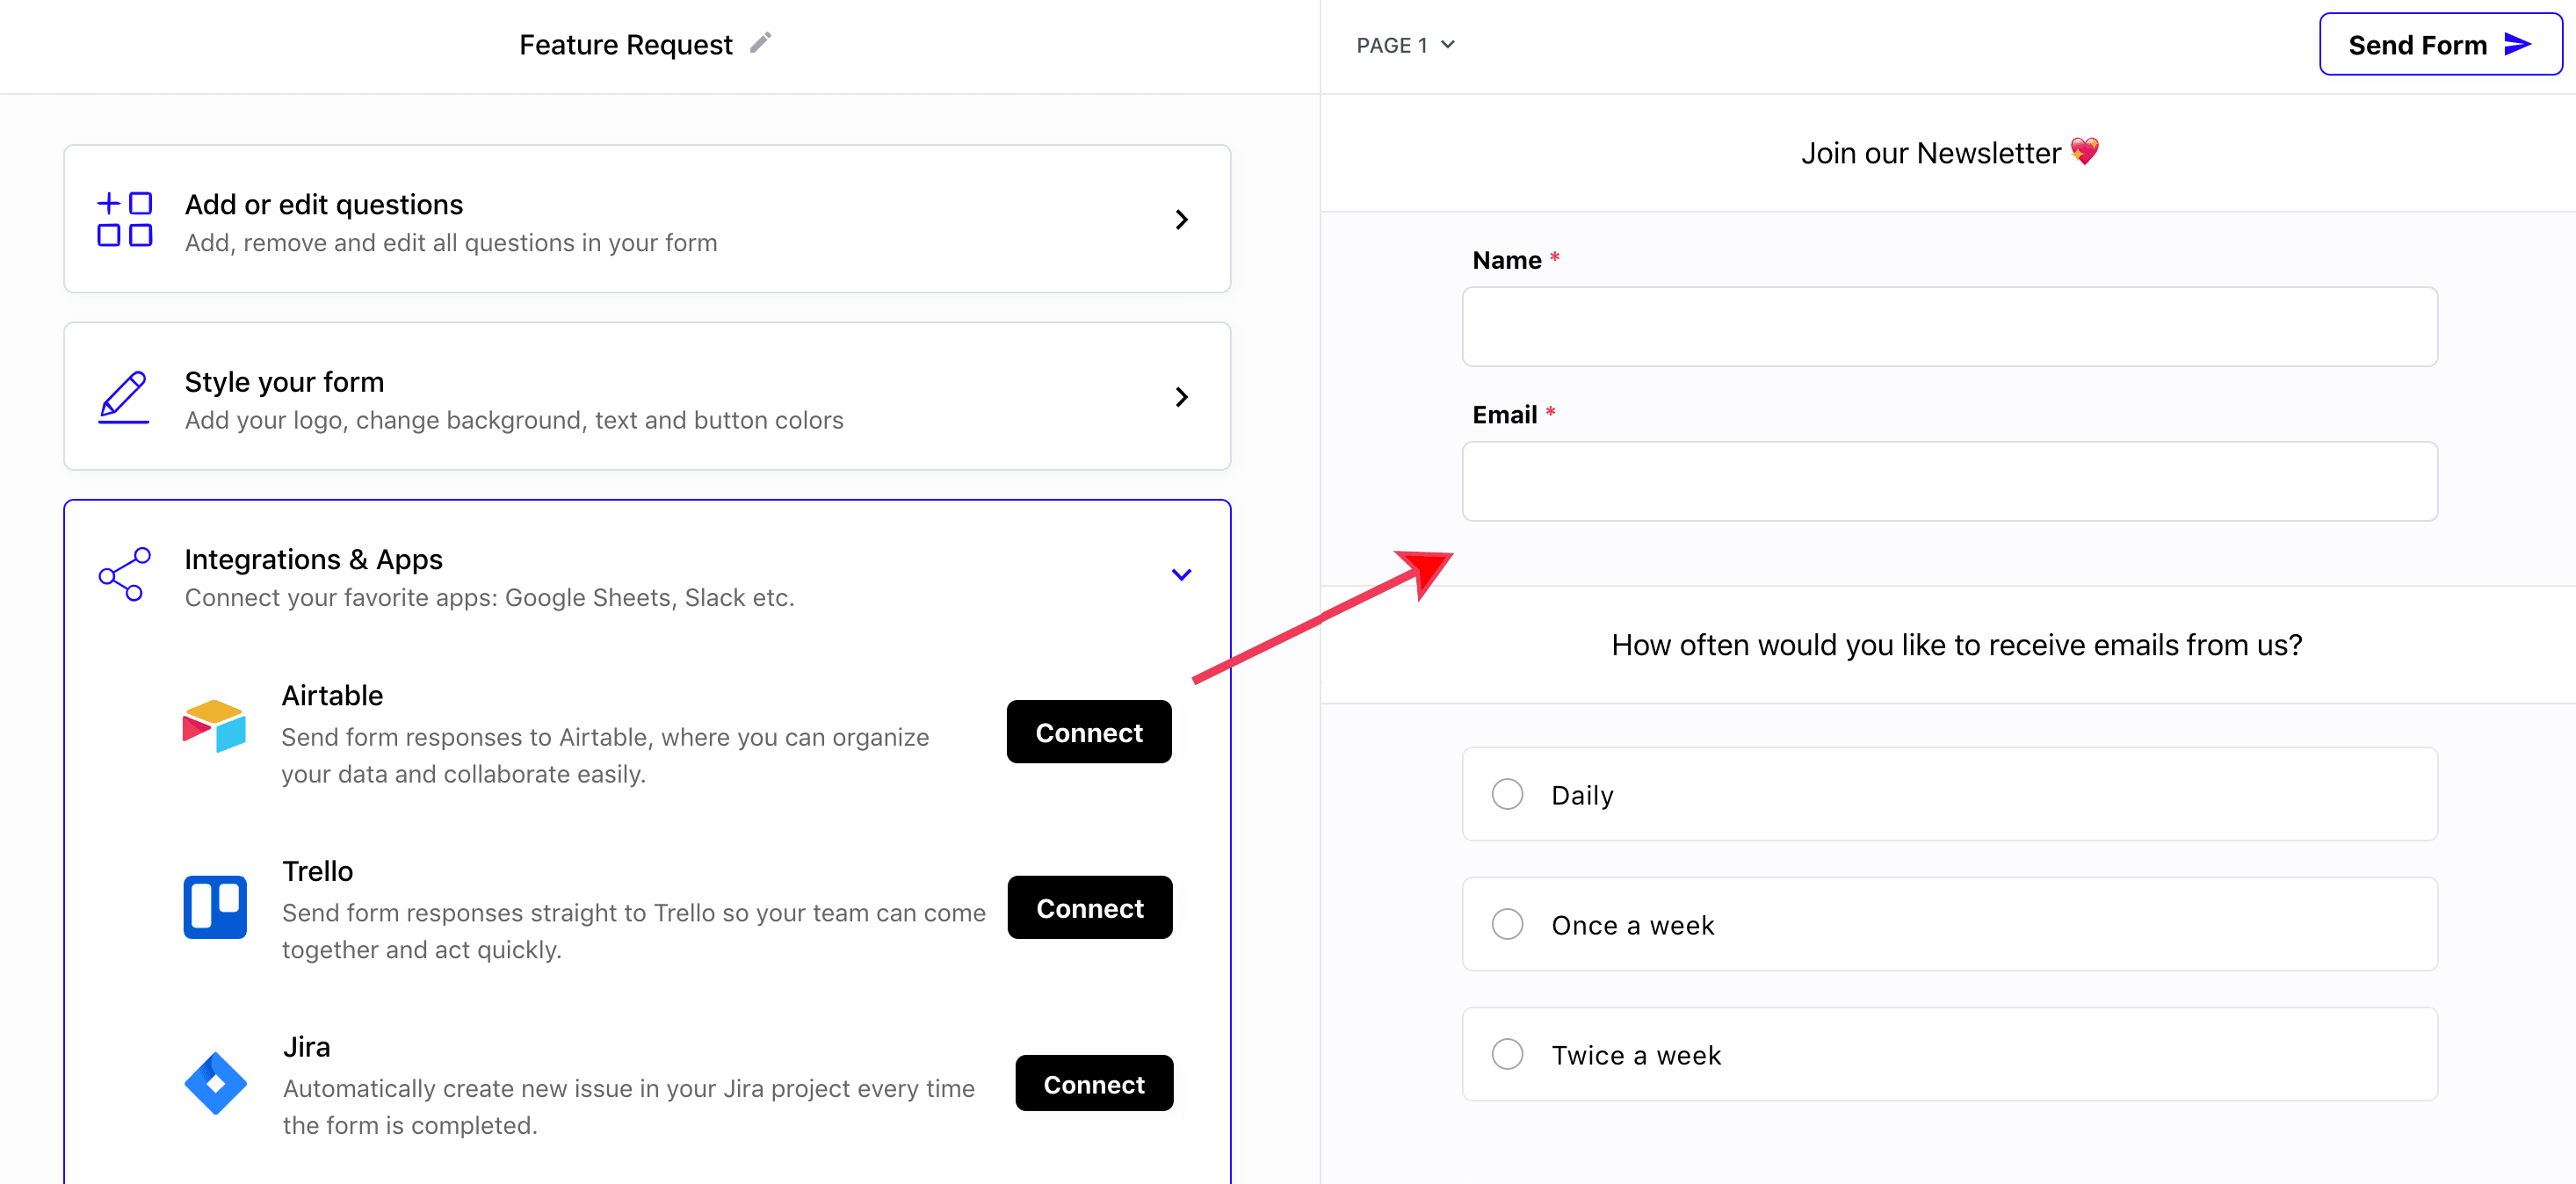 Connect form with Airtable